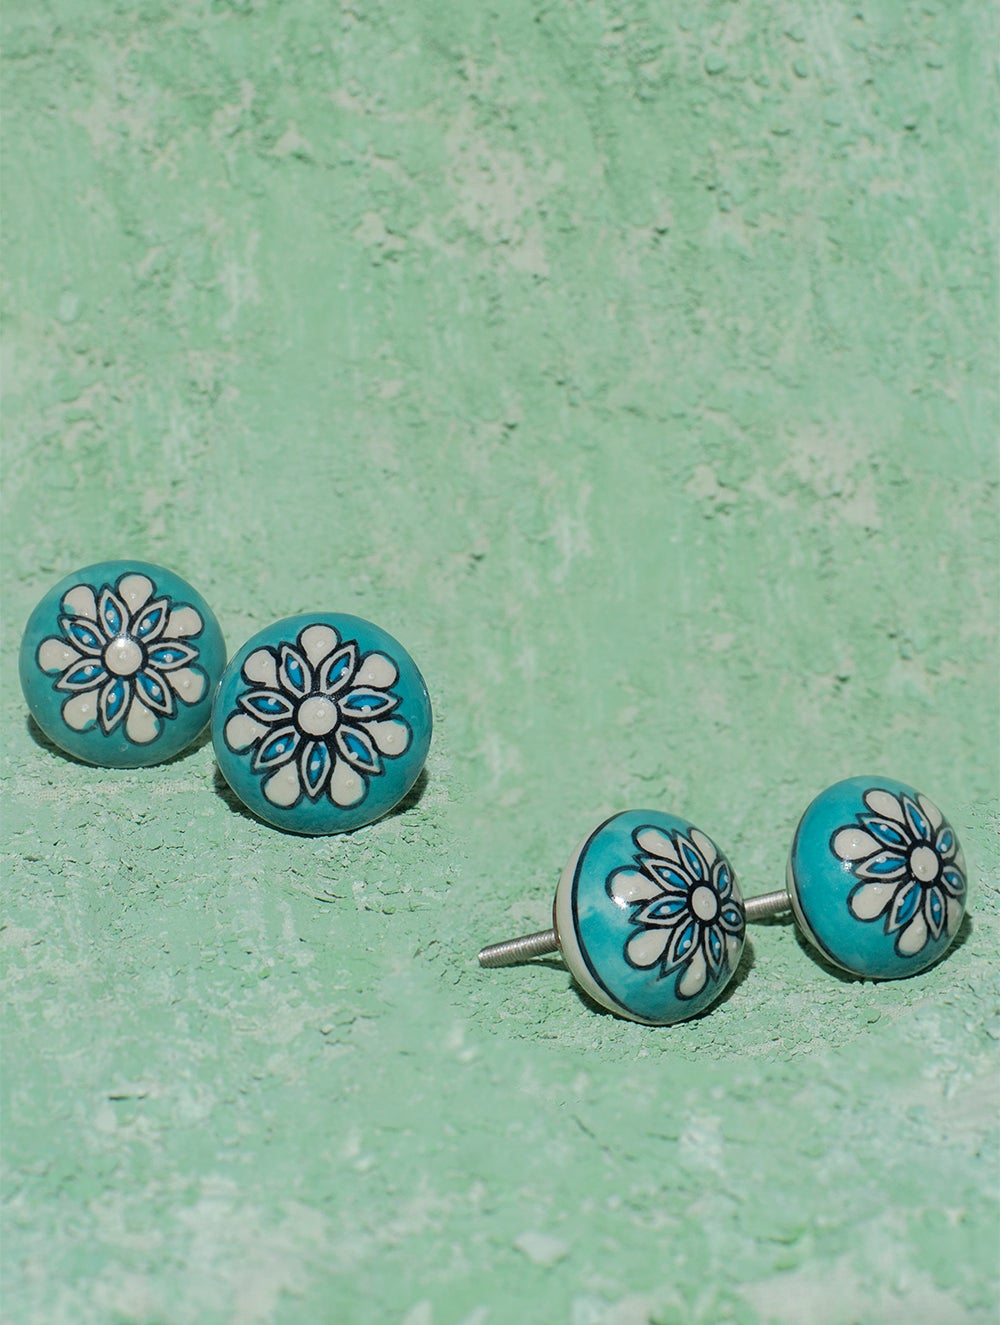 Load image into Gallery viewer, Blue Pottery Door Knobs - Sea Green Floral (Set of 4)